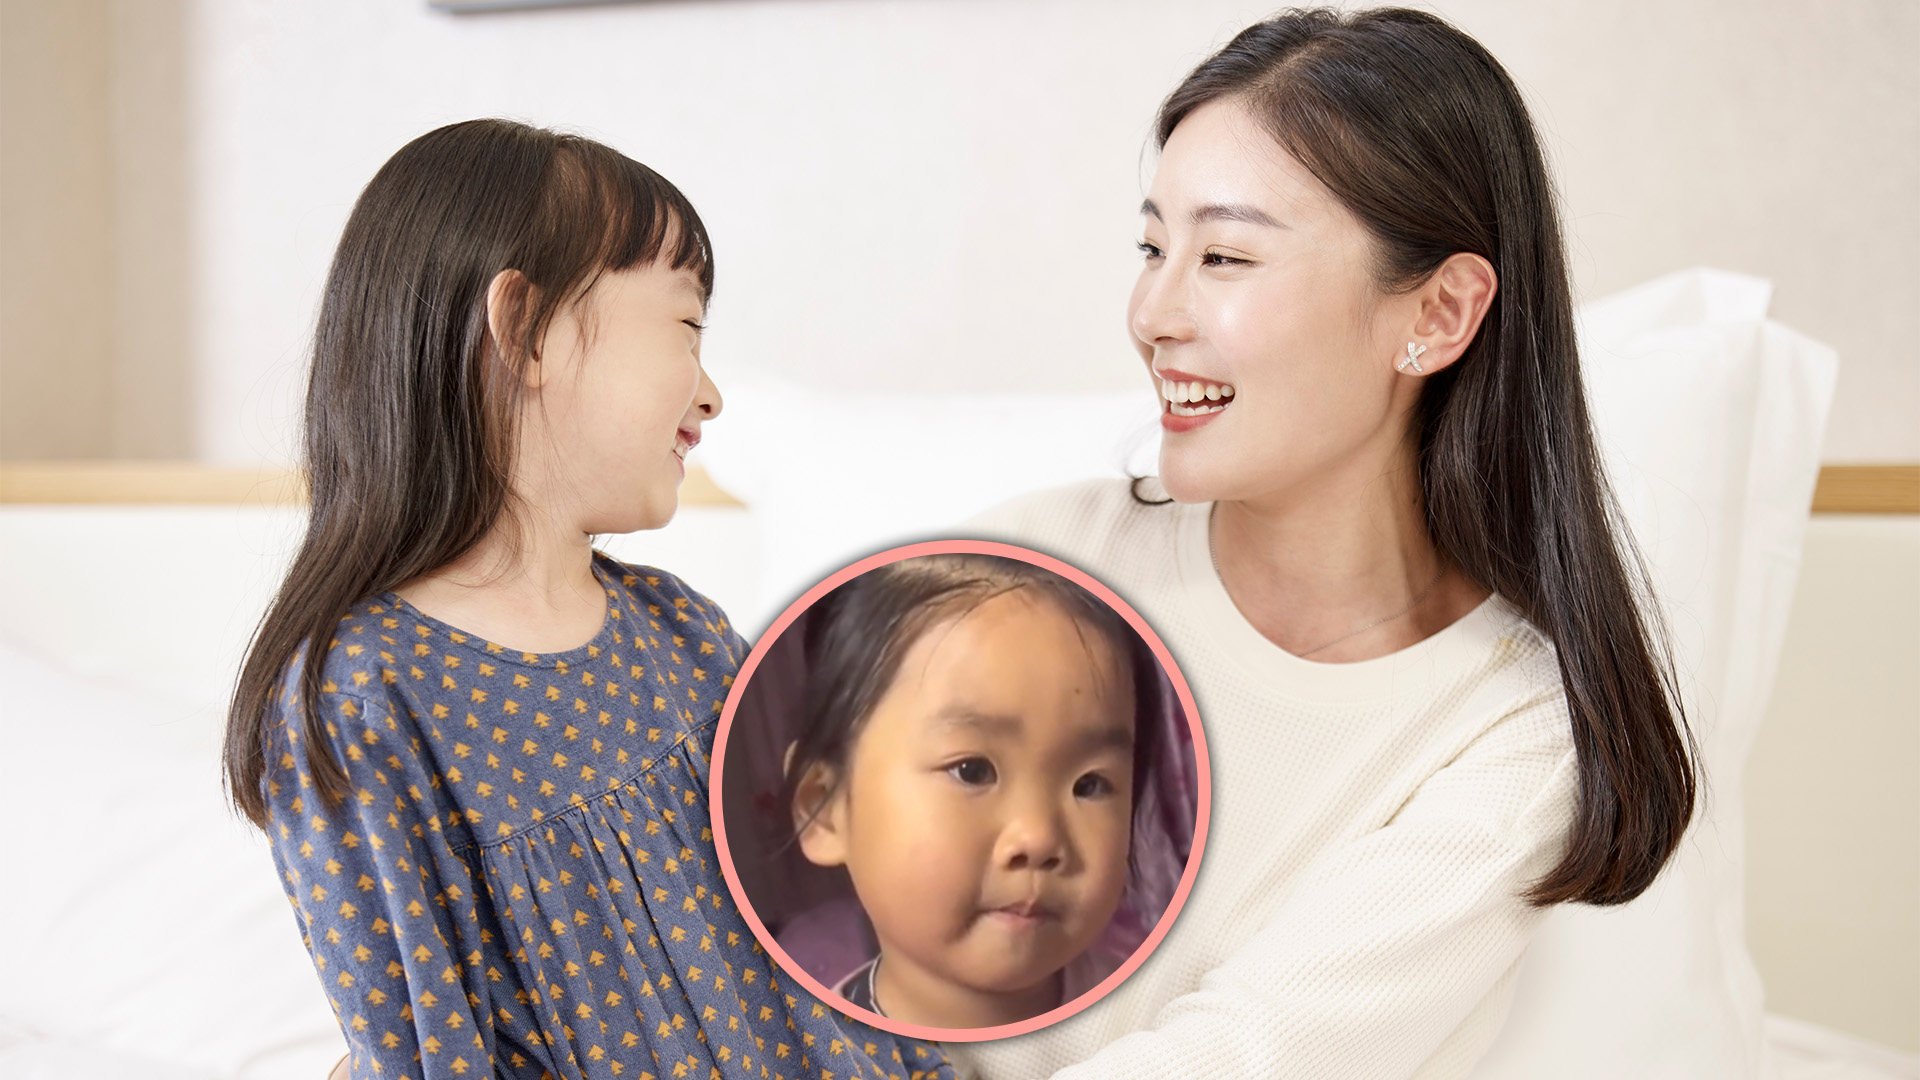 A young girl gained online attention when she expressed concern about her mother’s grey hairs, fearing that they might indicate the woman’s impending demise. Photo: SCMP composite/Shutterstock/Weibo